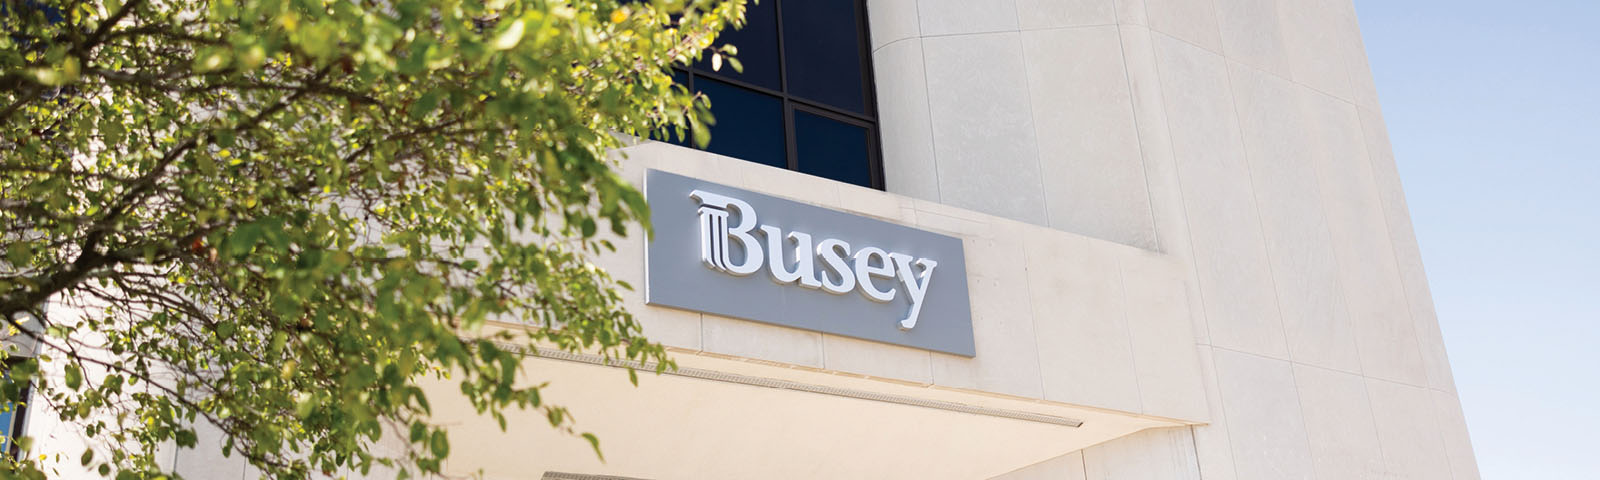 Busey sign on a builiding